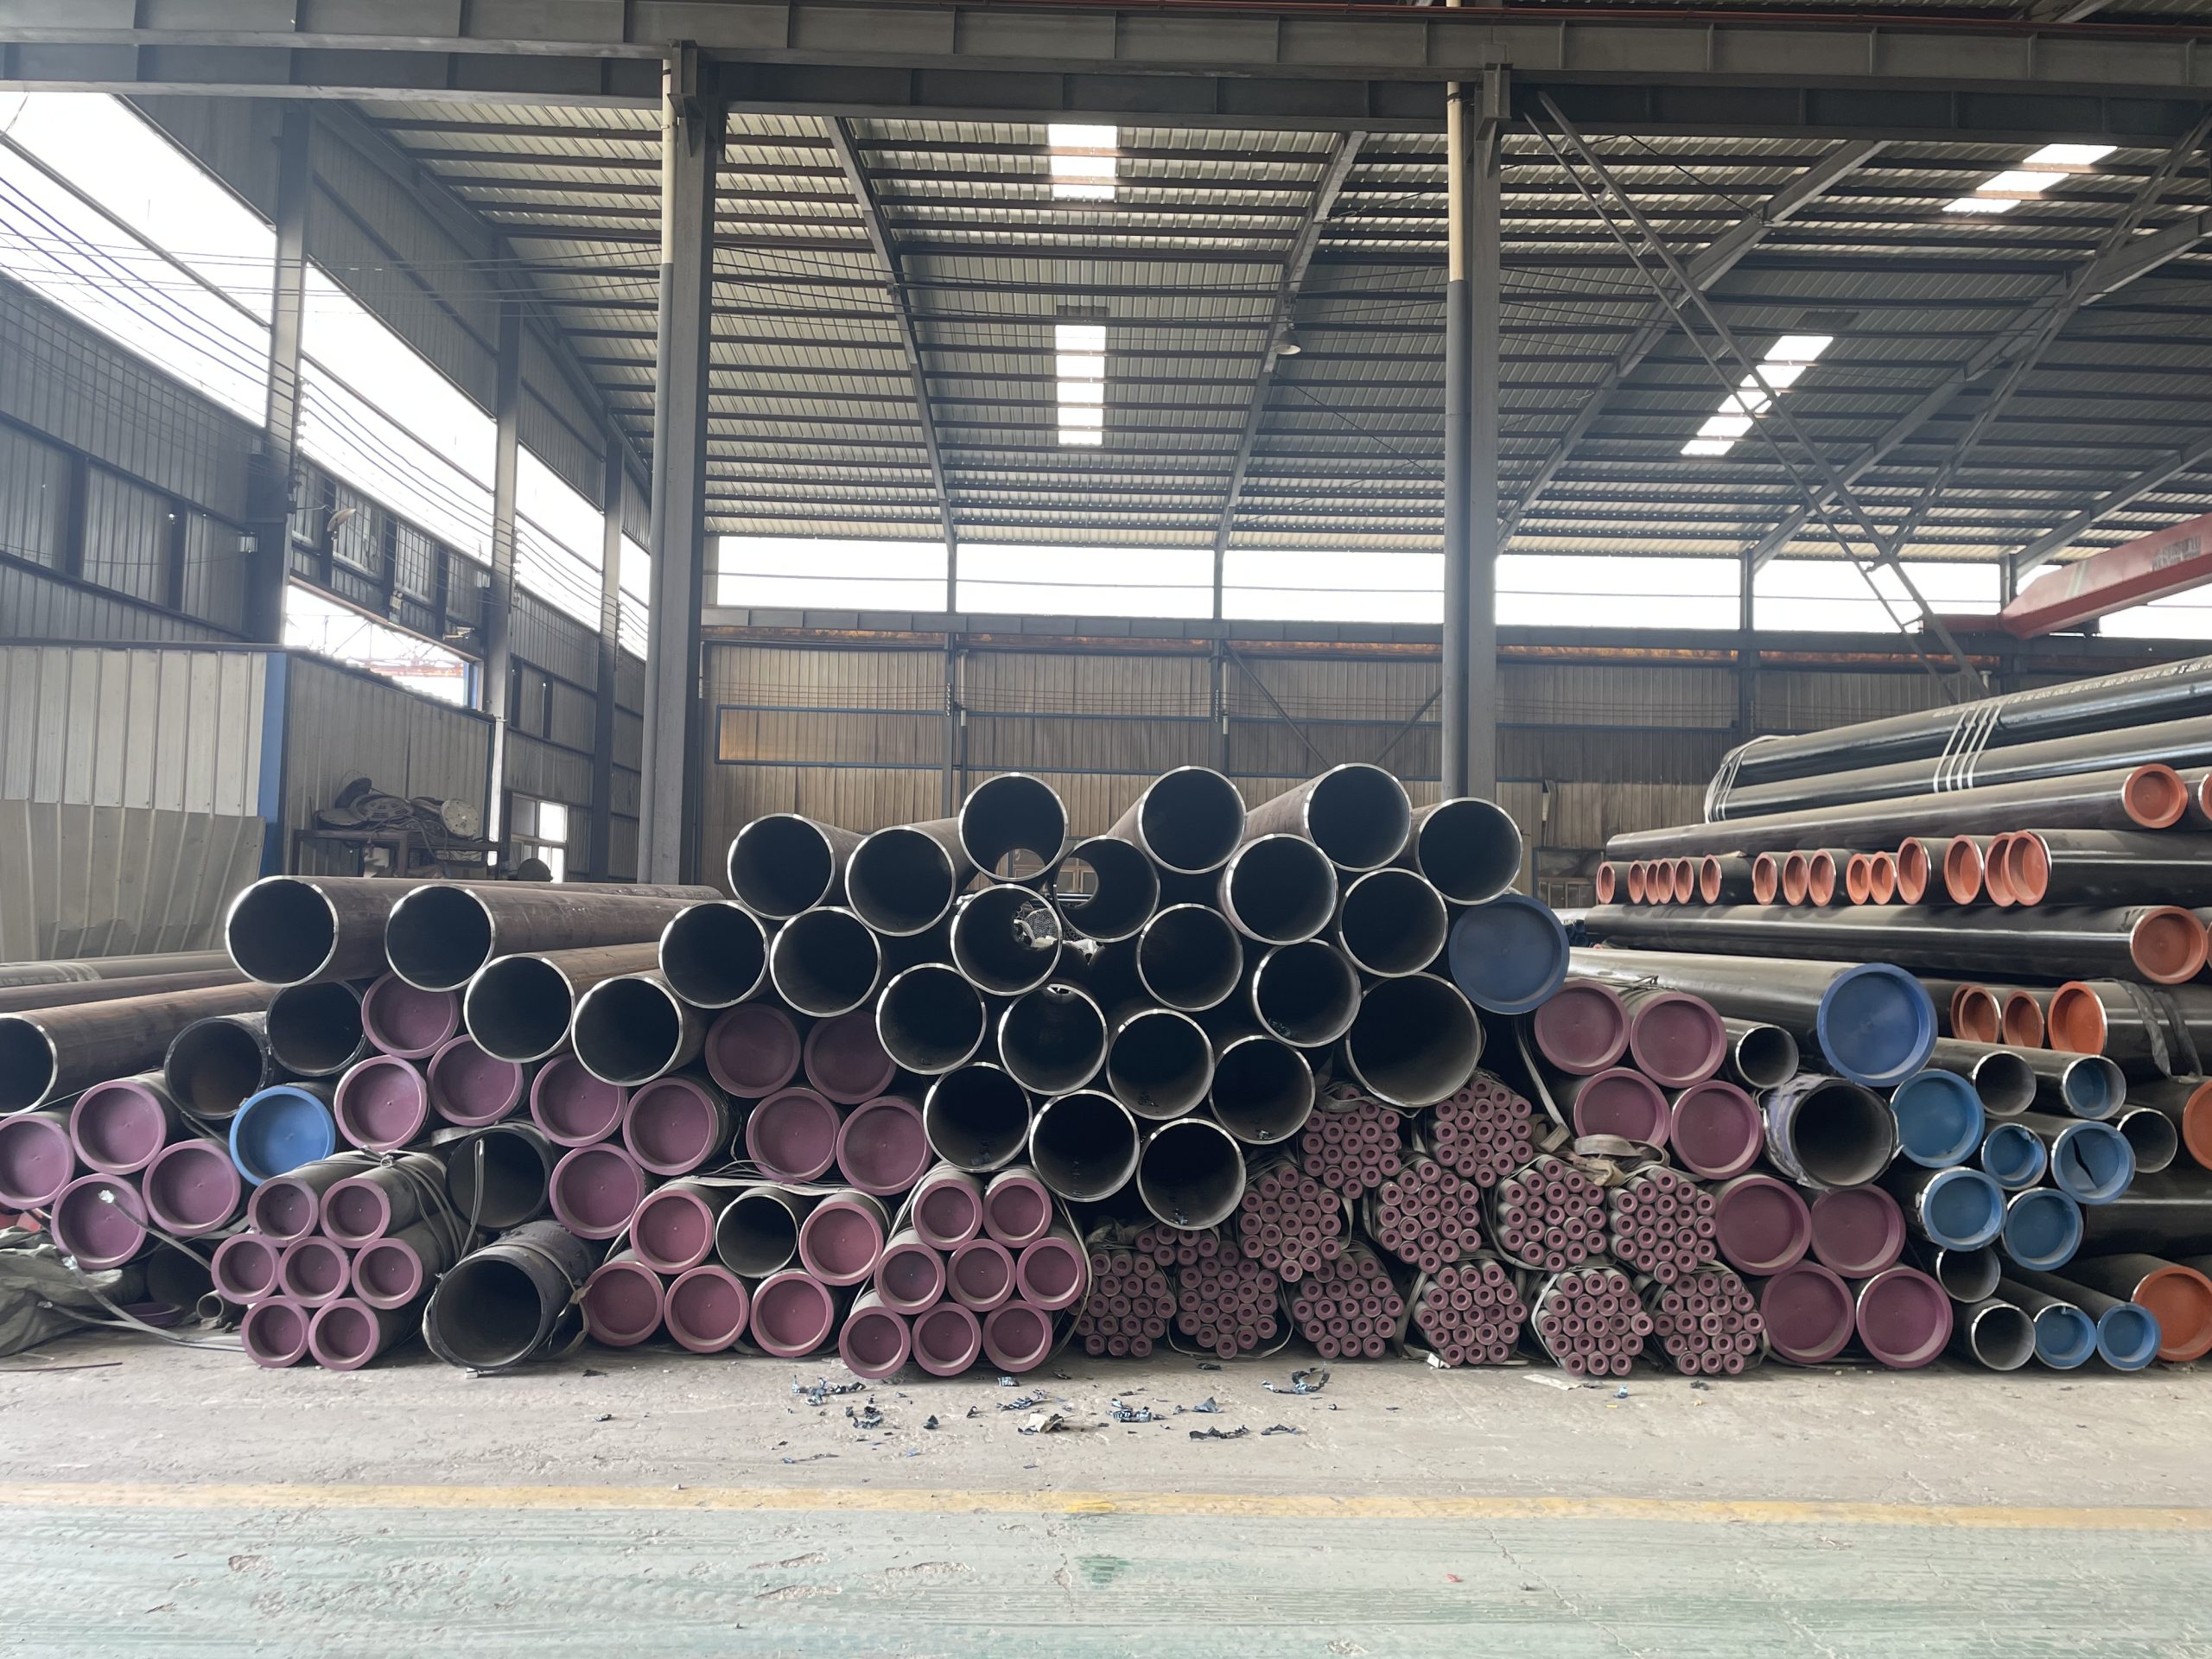 astm a53 mild seamless carbon steel pipe